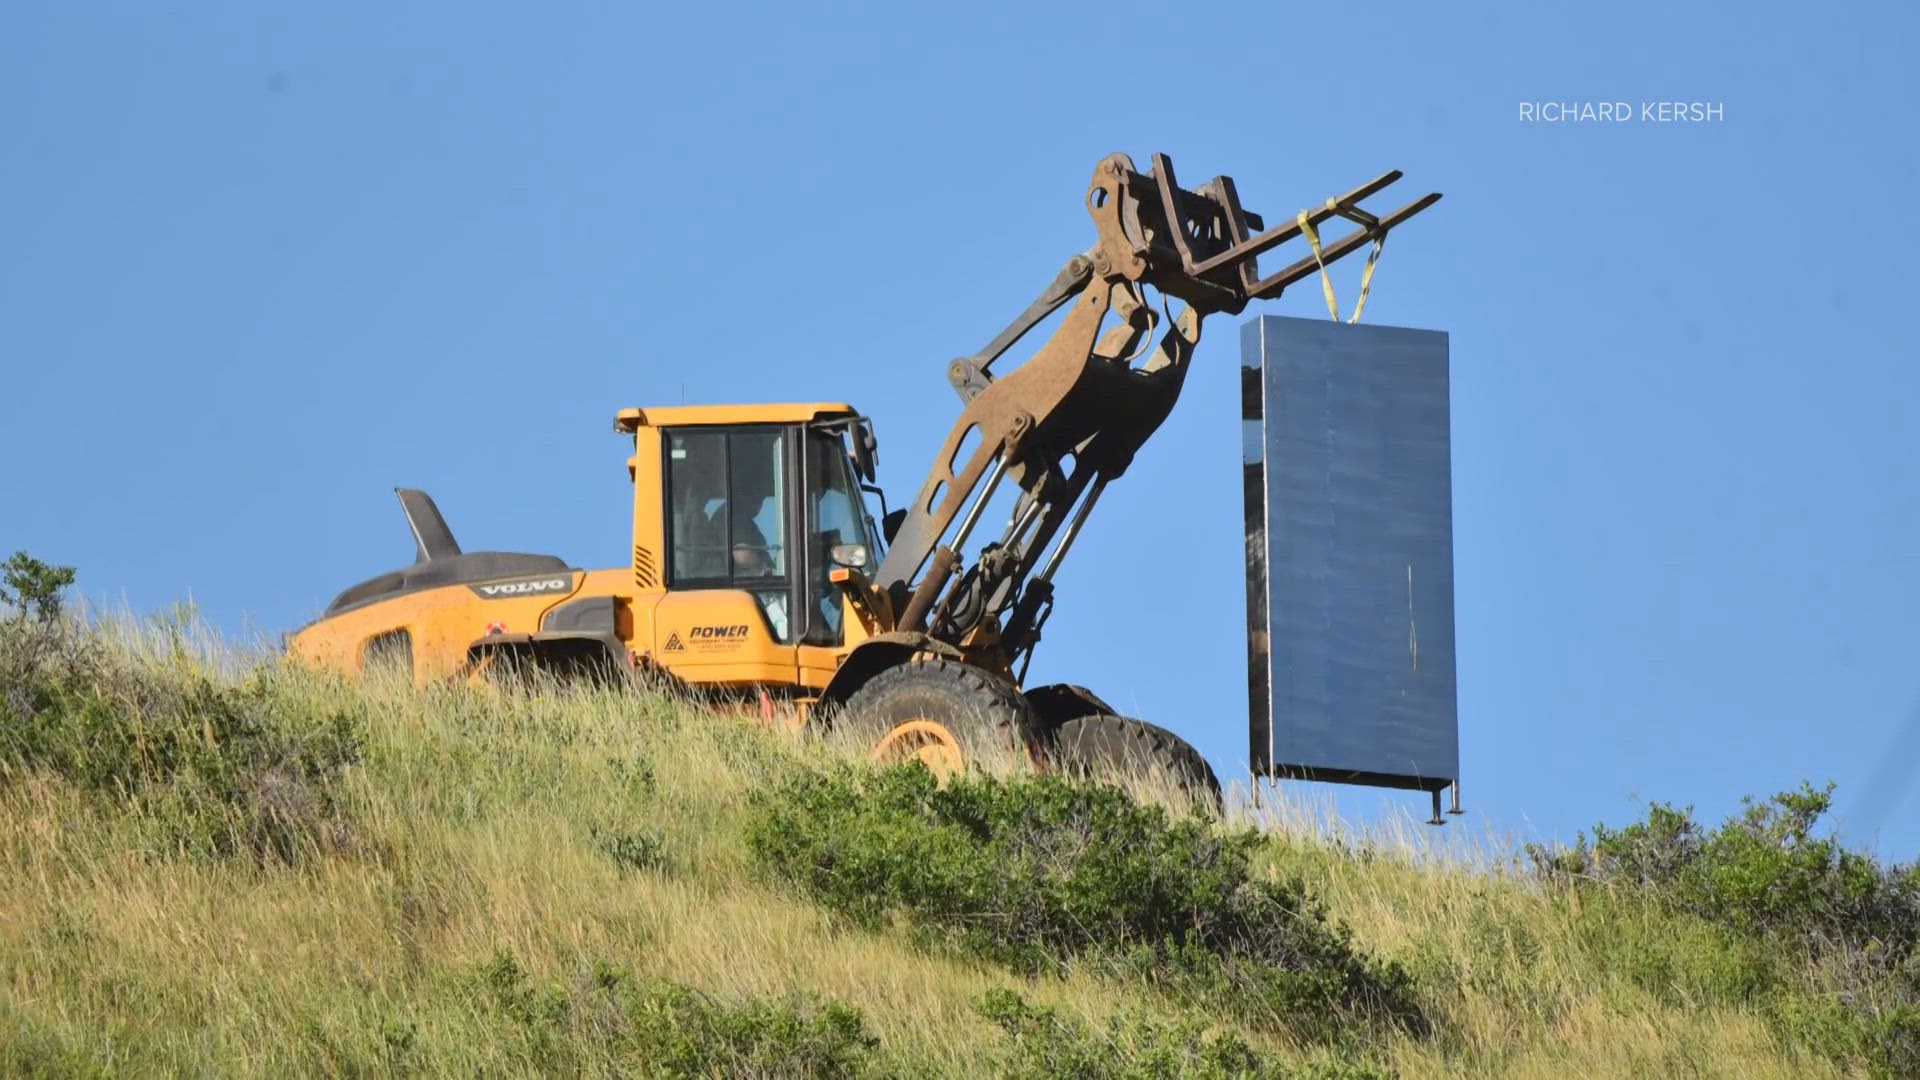 Mysterious Monolith Removed from Colorado Farm